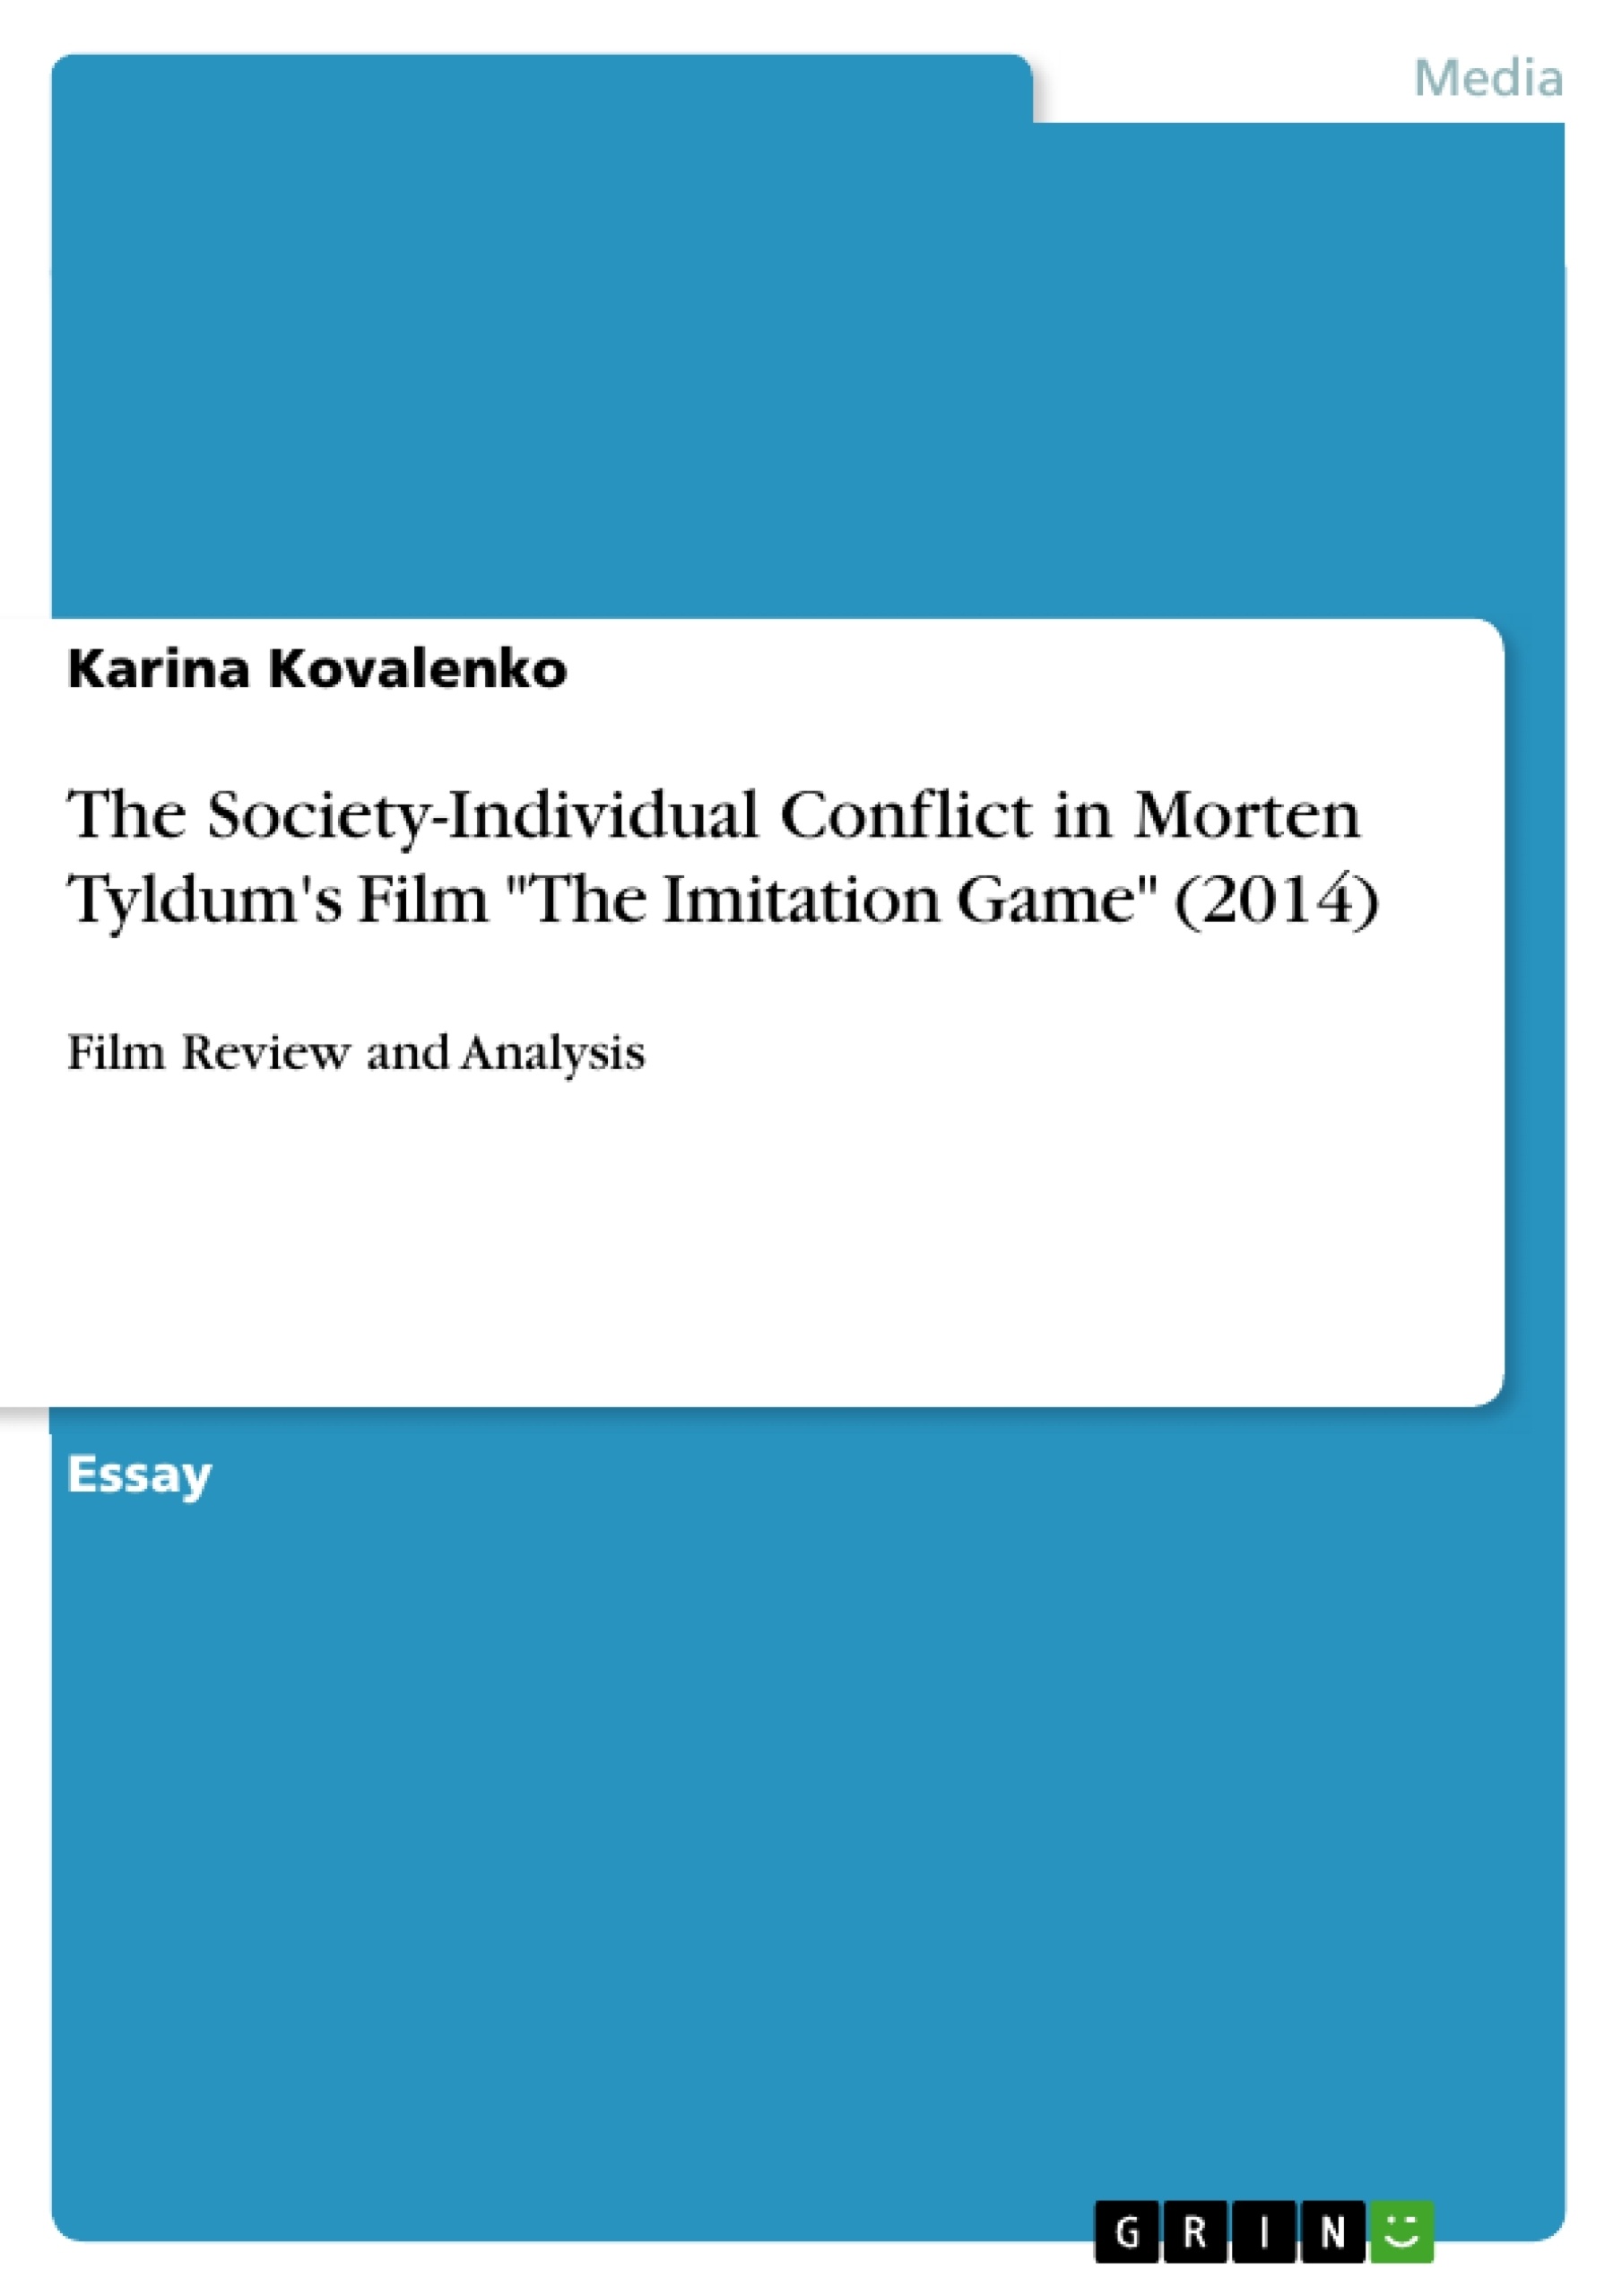 Titel: The Society-Individual Conflict in Morten Tyldum's Film "The Imitation Game" (2014)